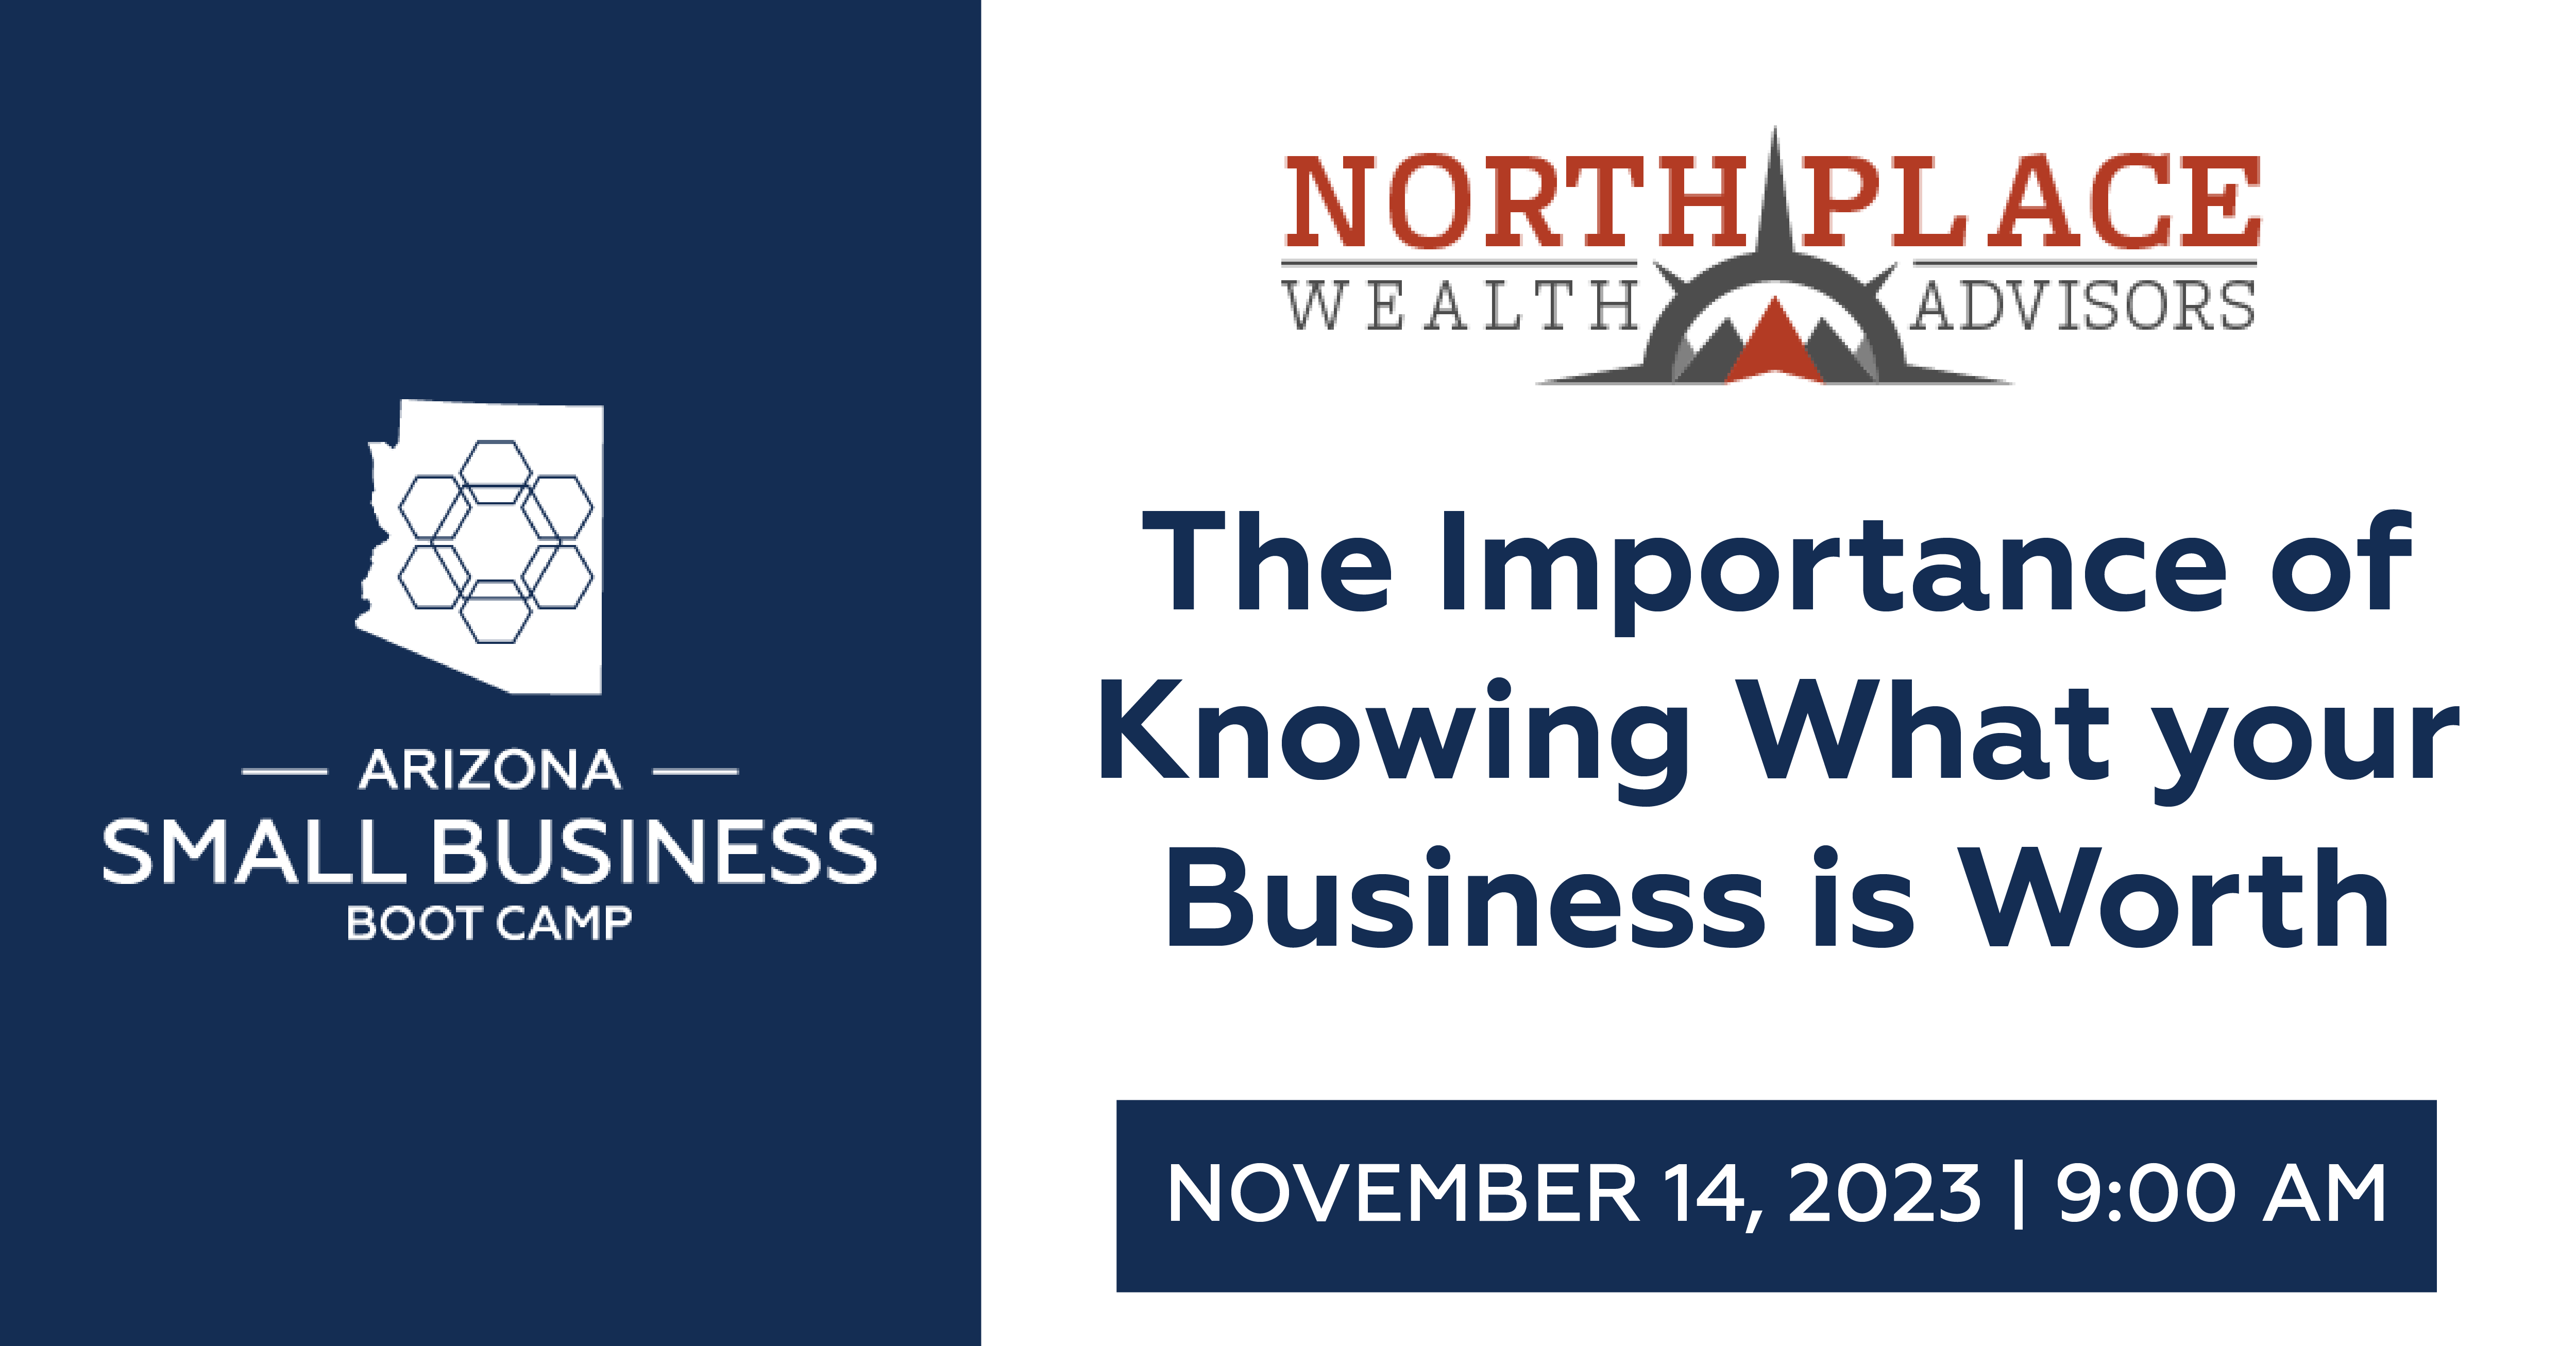 The Importance of Knowing What your Business is Worth